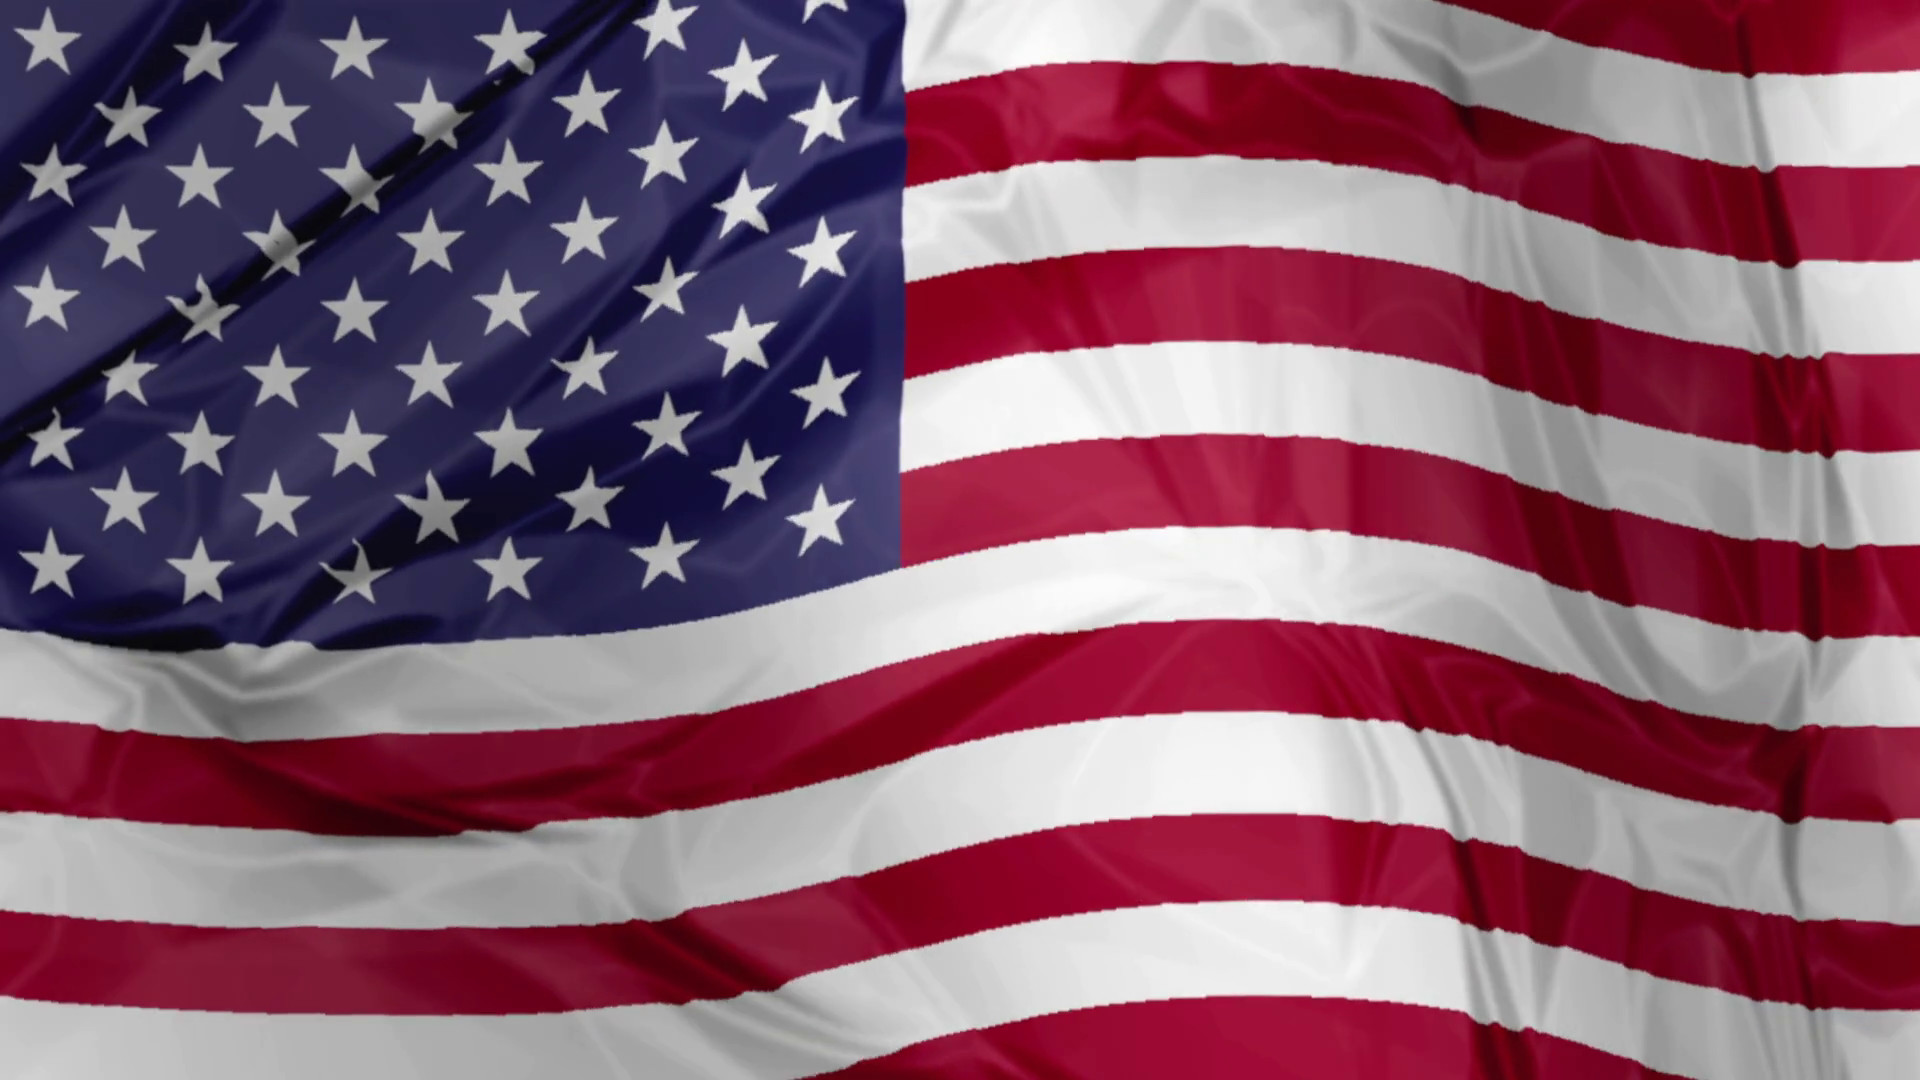 1920x1080 3D waving American flag background with fifty stars and red white stripes,  America US Motion Background - Storyblocks Video